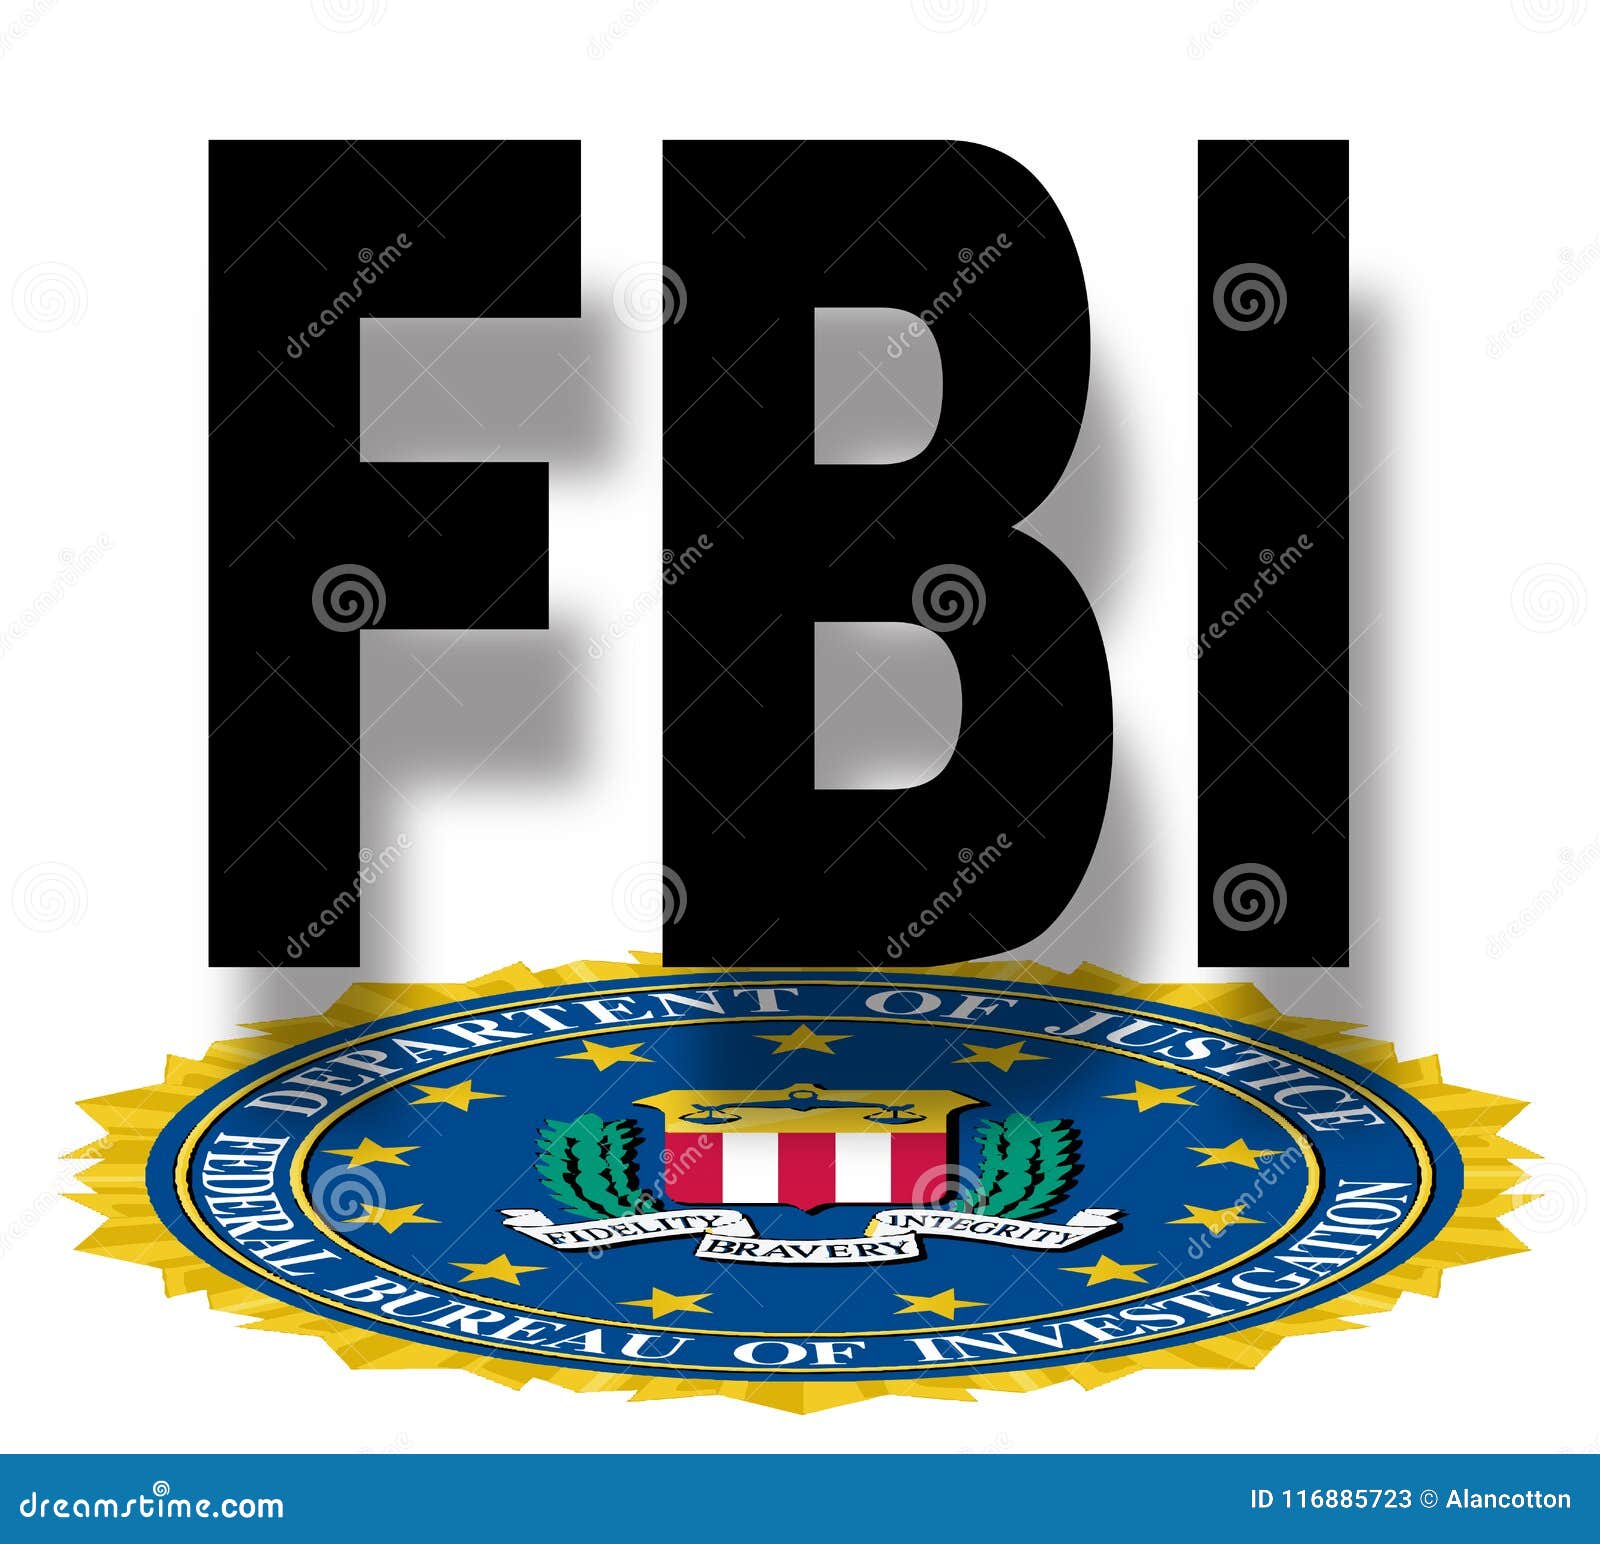 fbi seal with text on a white background